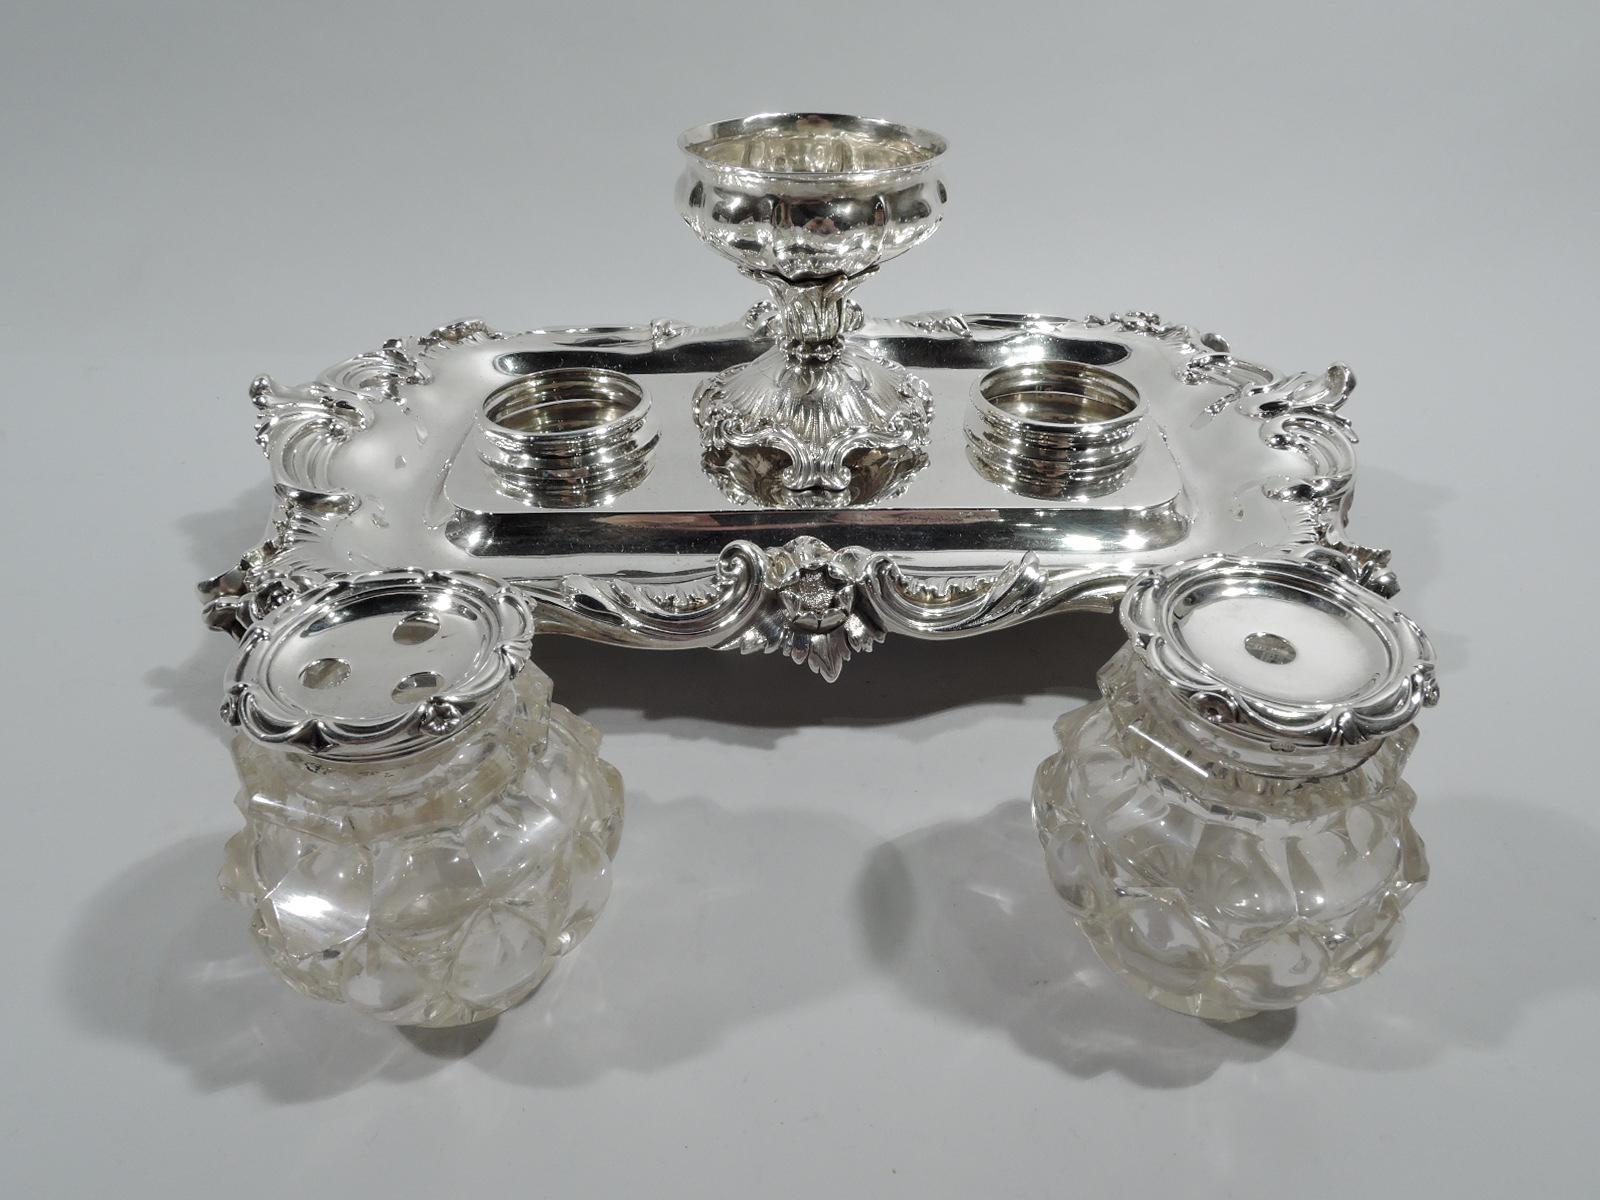 George IV sterling silver inkstand. Made by Barnard & Sons, Ltd in London in 1832. Stand has plain rectilinear well with curved corners and mounted wafer bowl set in leafy mount on spread and scrolled foot between rings supporting inkpot and sander.